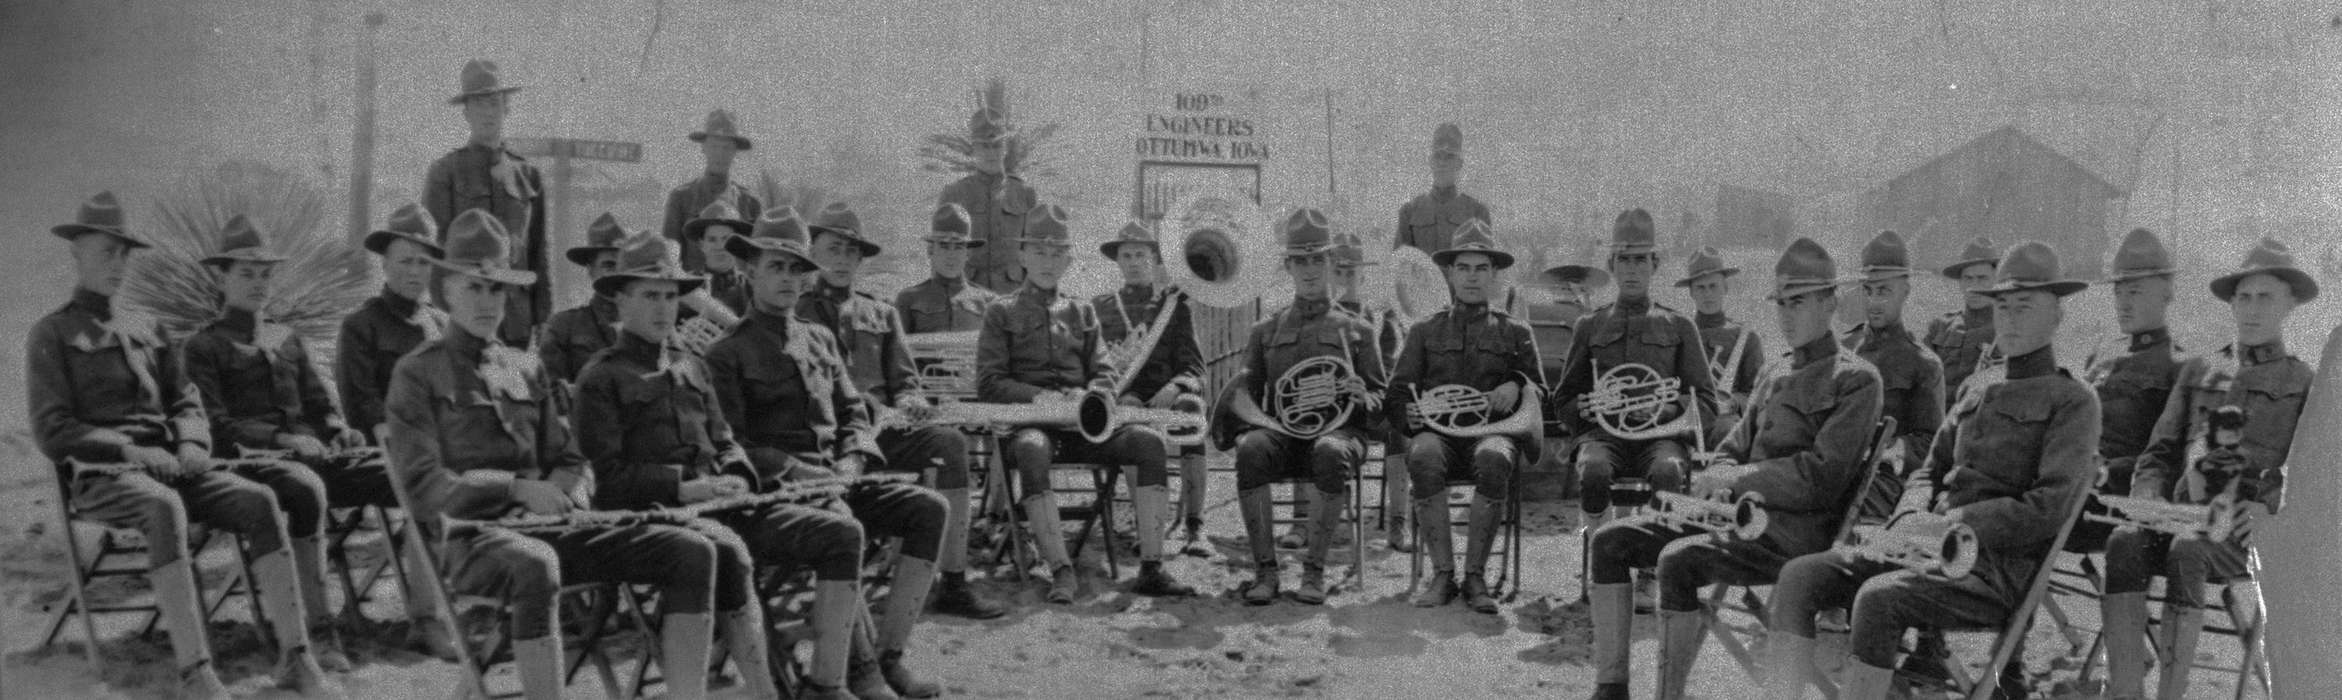 Lemberger, LeAnn, Iowa, history of Iowa, french horn, Military and Veterans, military, USA, trumpet, Iowa History, tuba, Portraits - Group, band, flute